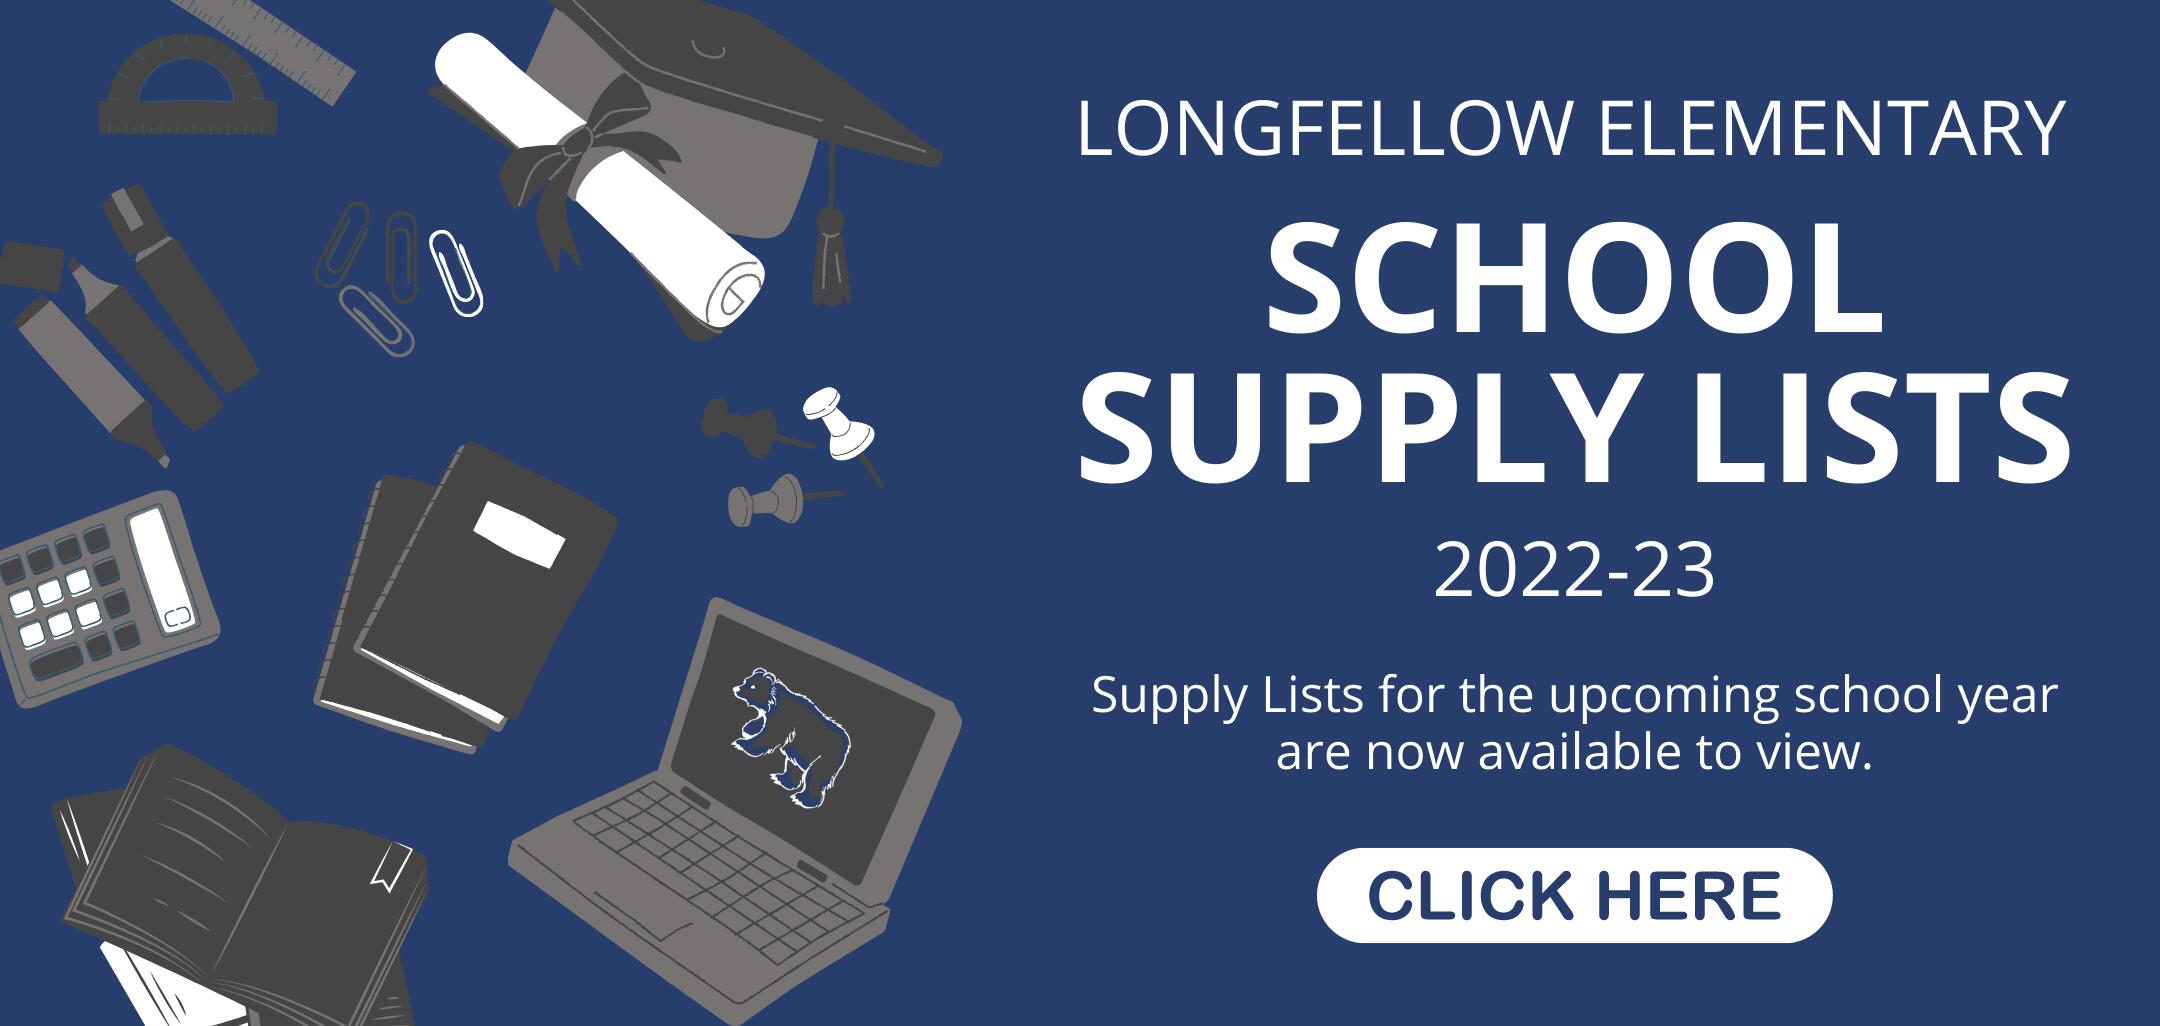 Click here to view 2022-23 Longfellow Supply Lists